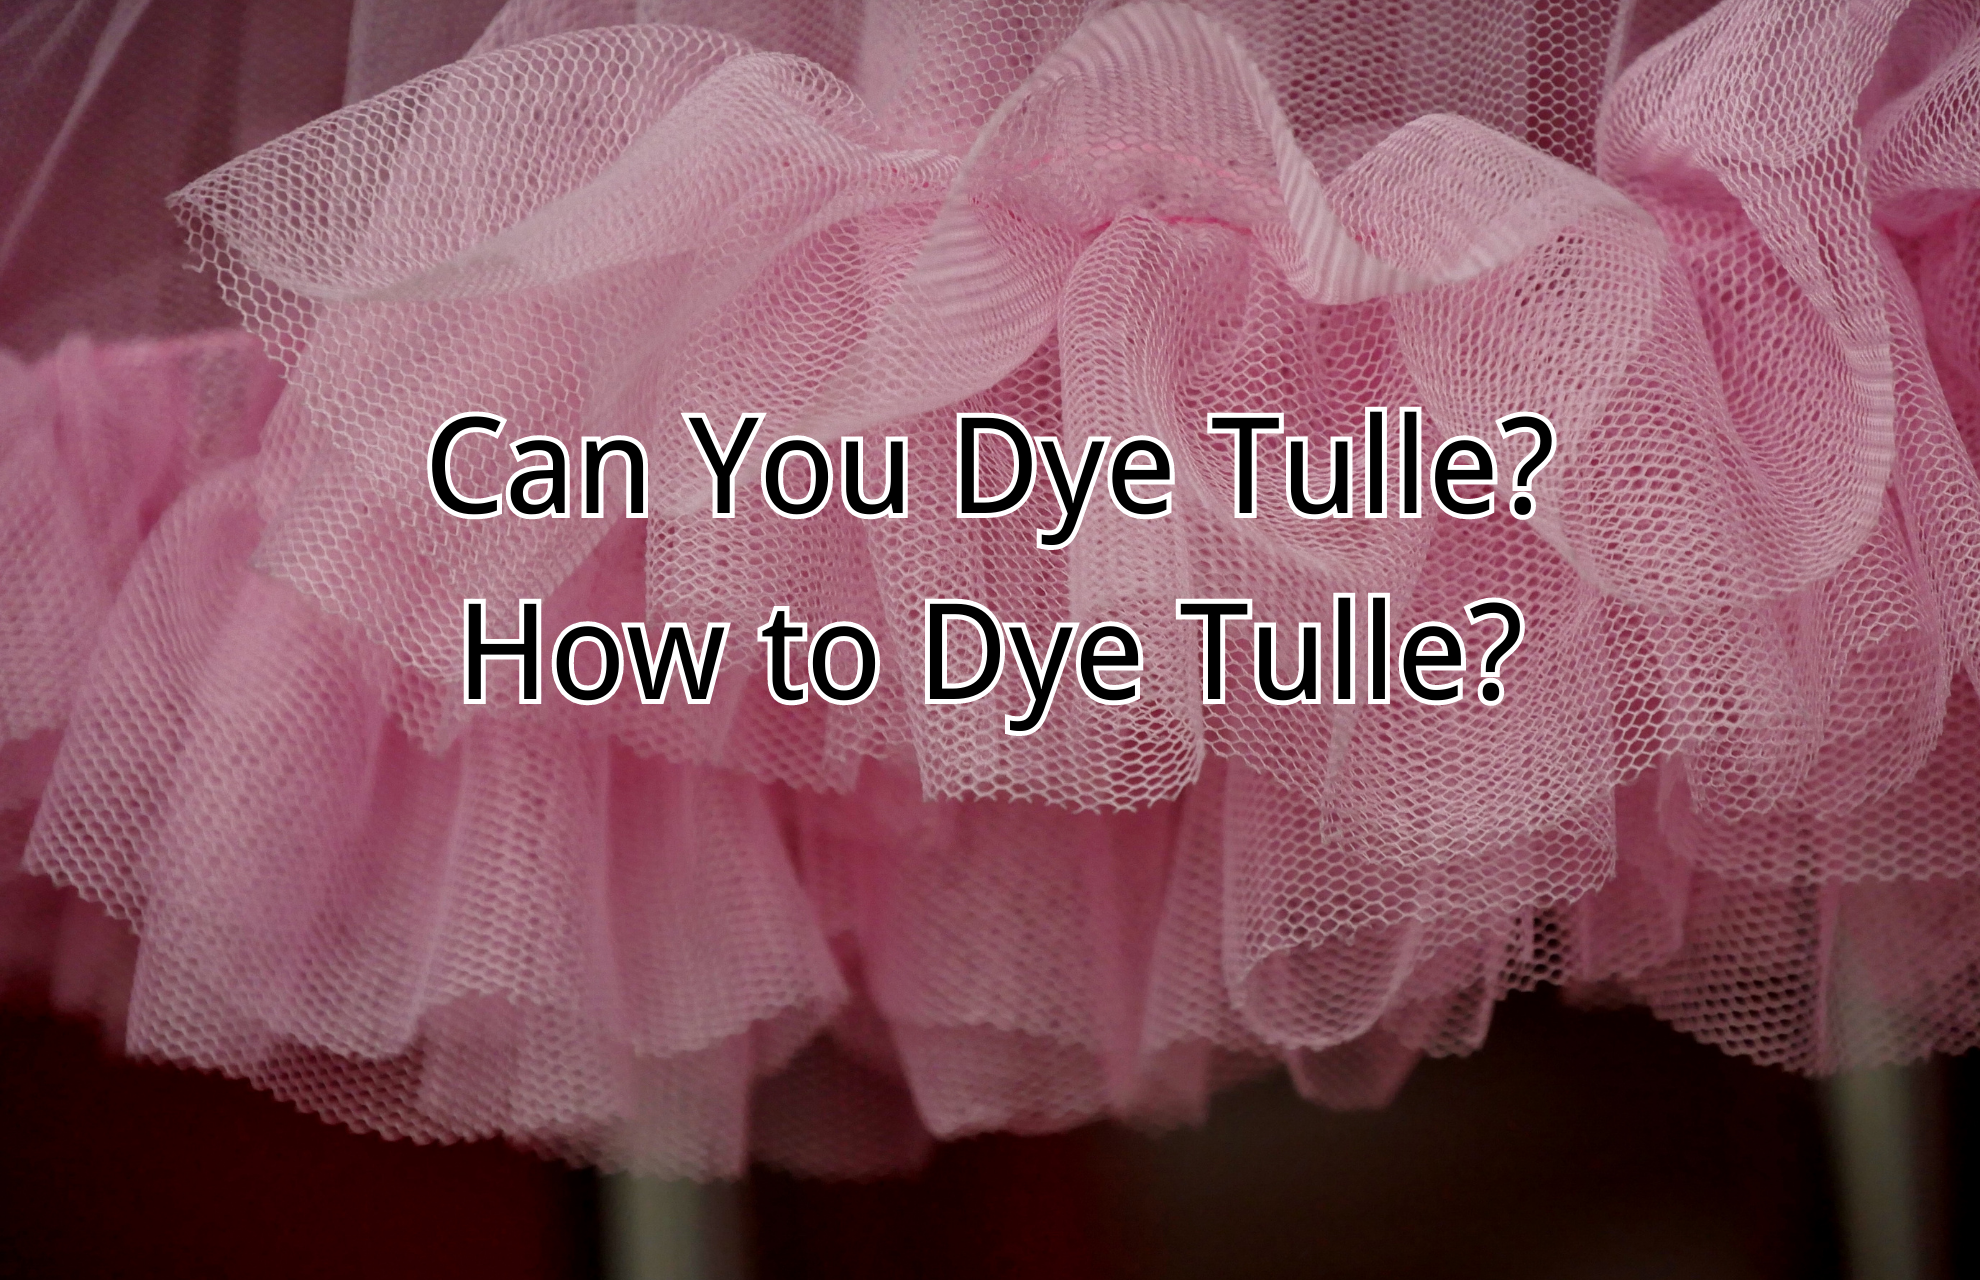 Can You Dye Tulle? How to Dye Tulle?